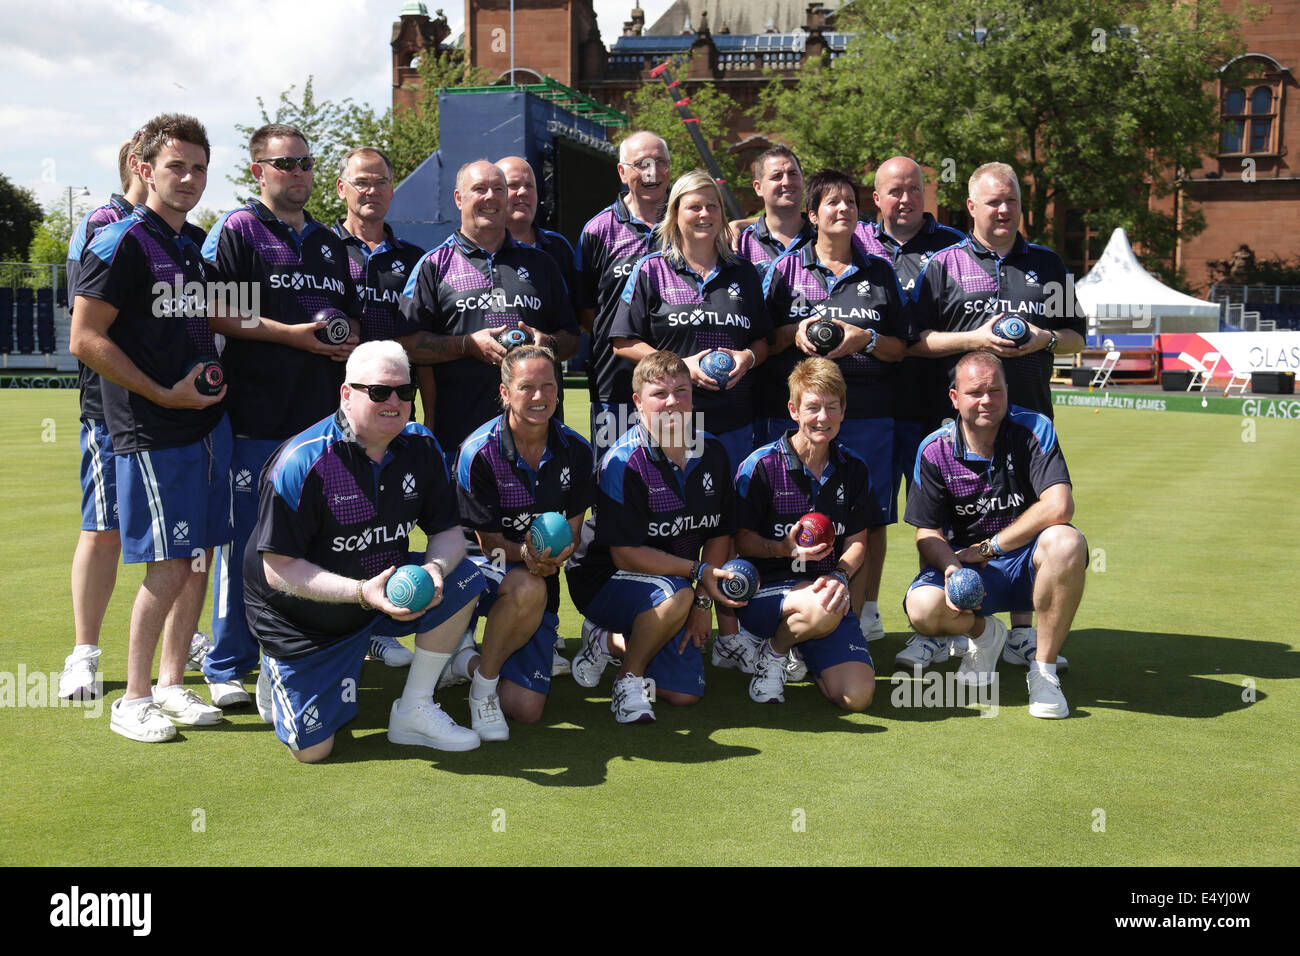 Kelvingrove Lawn Bowls Centre, Glasgow, Scotland, UK, Thursday, 17th July, 2014. Team Scotland Men's, Women's and Para-Sport Lawn Bowls Teams in the venue for the 2014 Commonwealth Games Lawn Bowls Competition Stock Photo